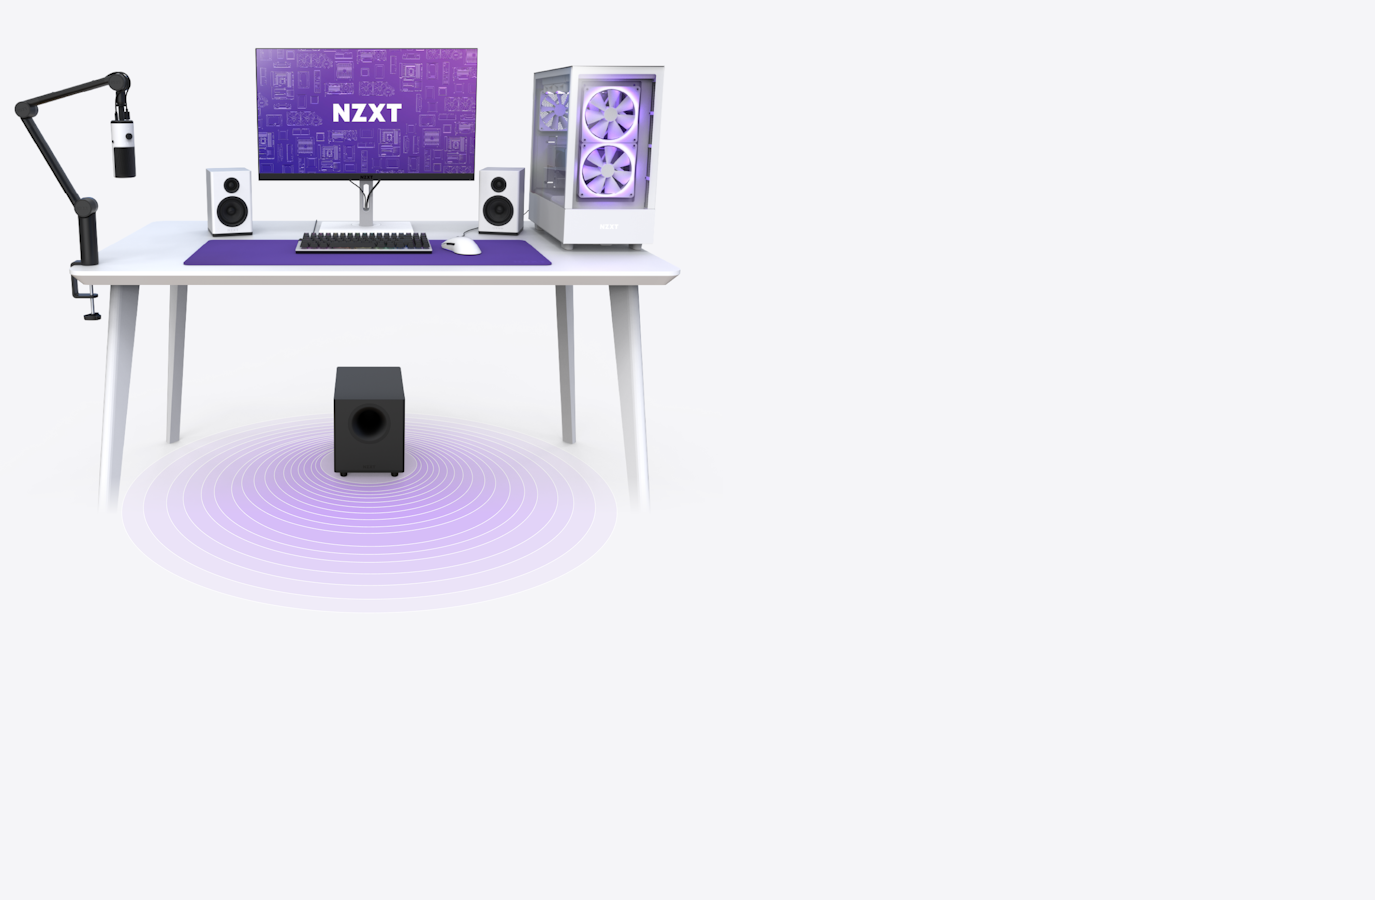 A desk setup with NZXT products highlighting the placement of the Relay Subwoofer below the desk with audio waves emanating from the down-firing driver.